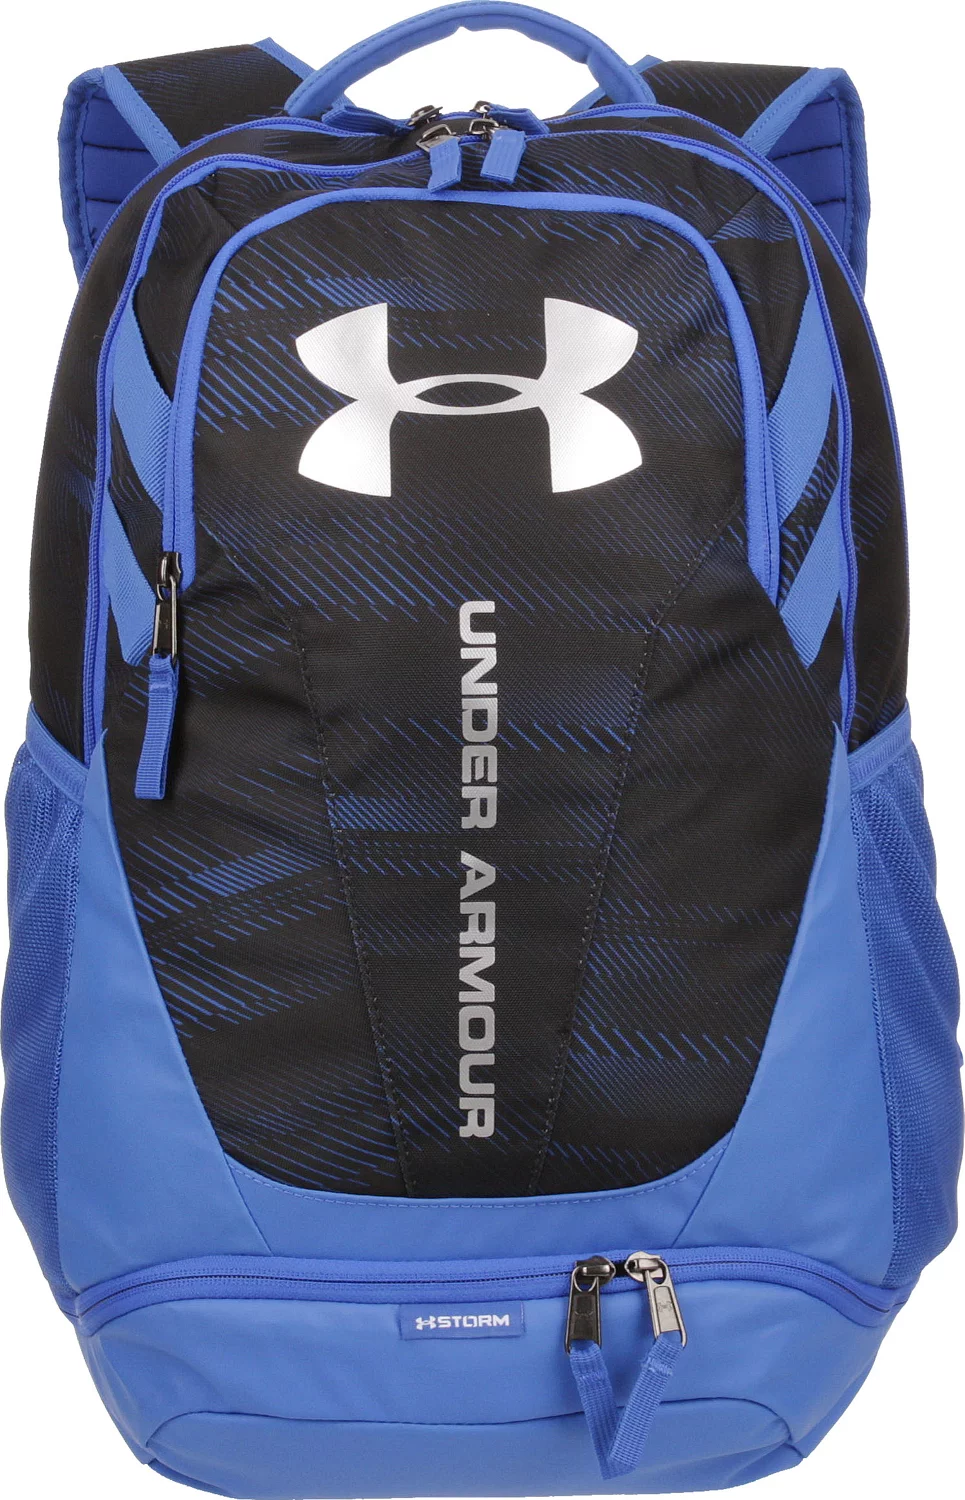 Backpack Bags For Mens Below 500 | The 